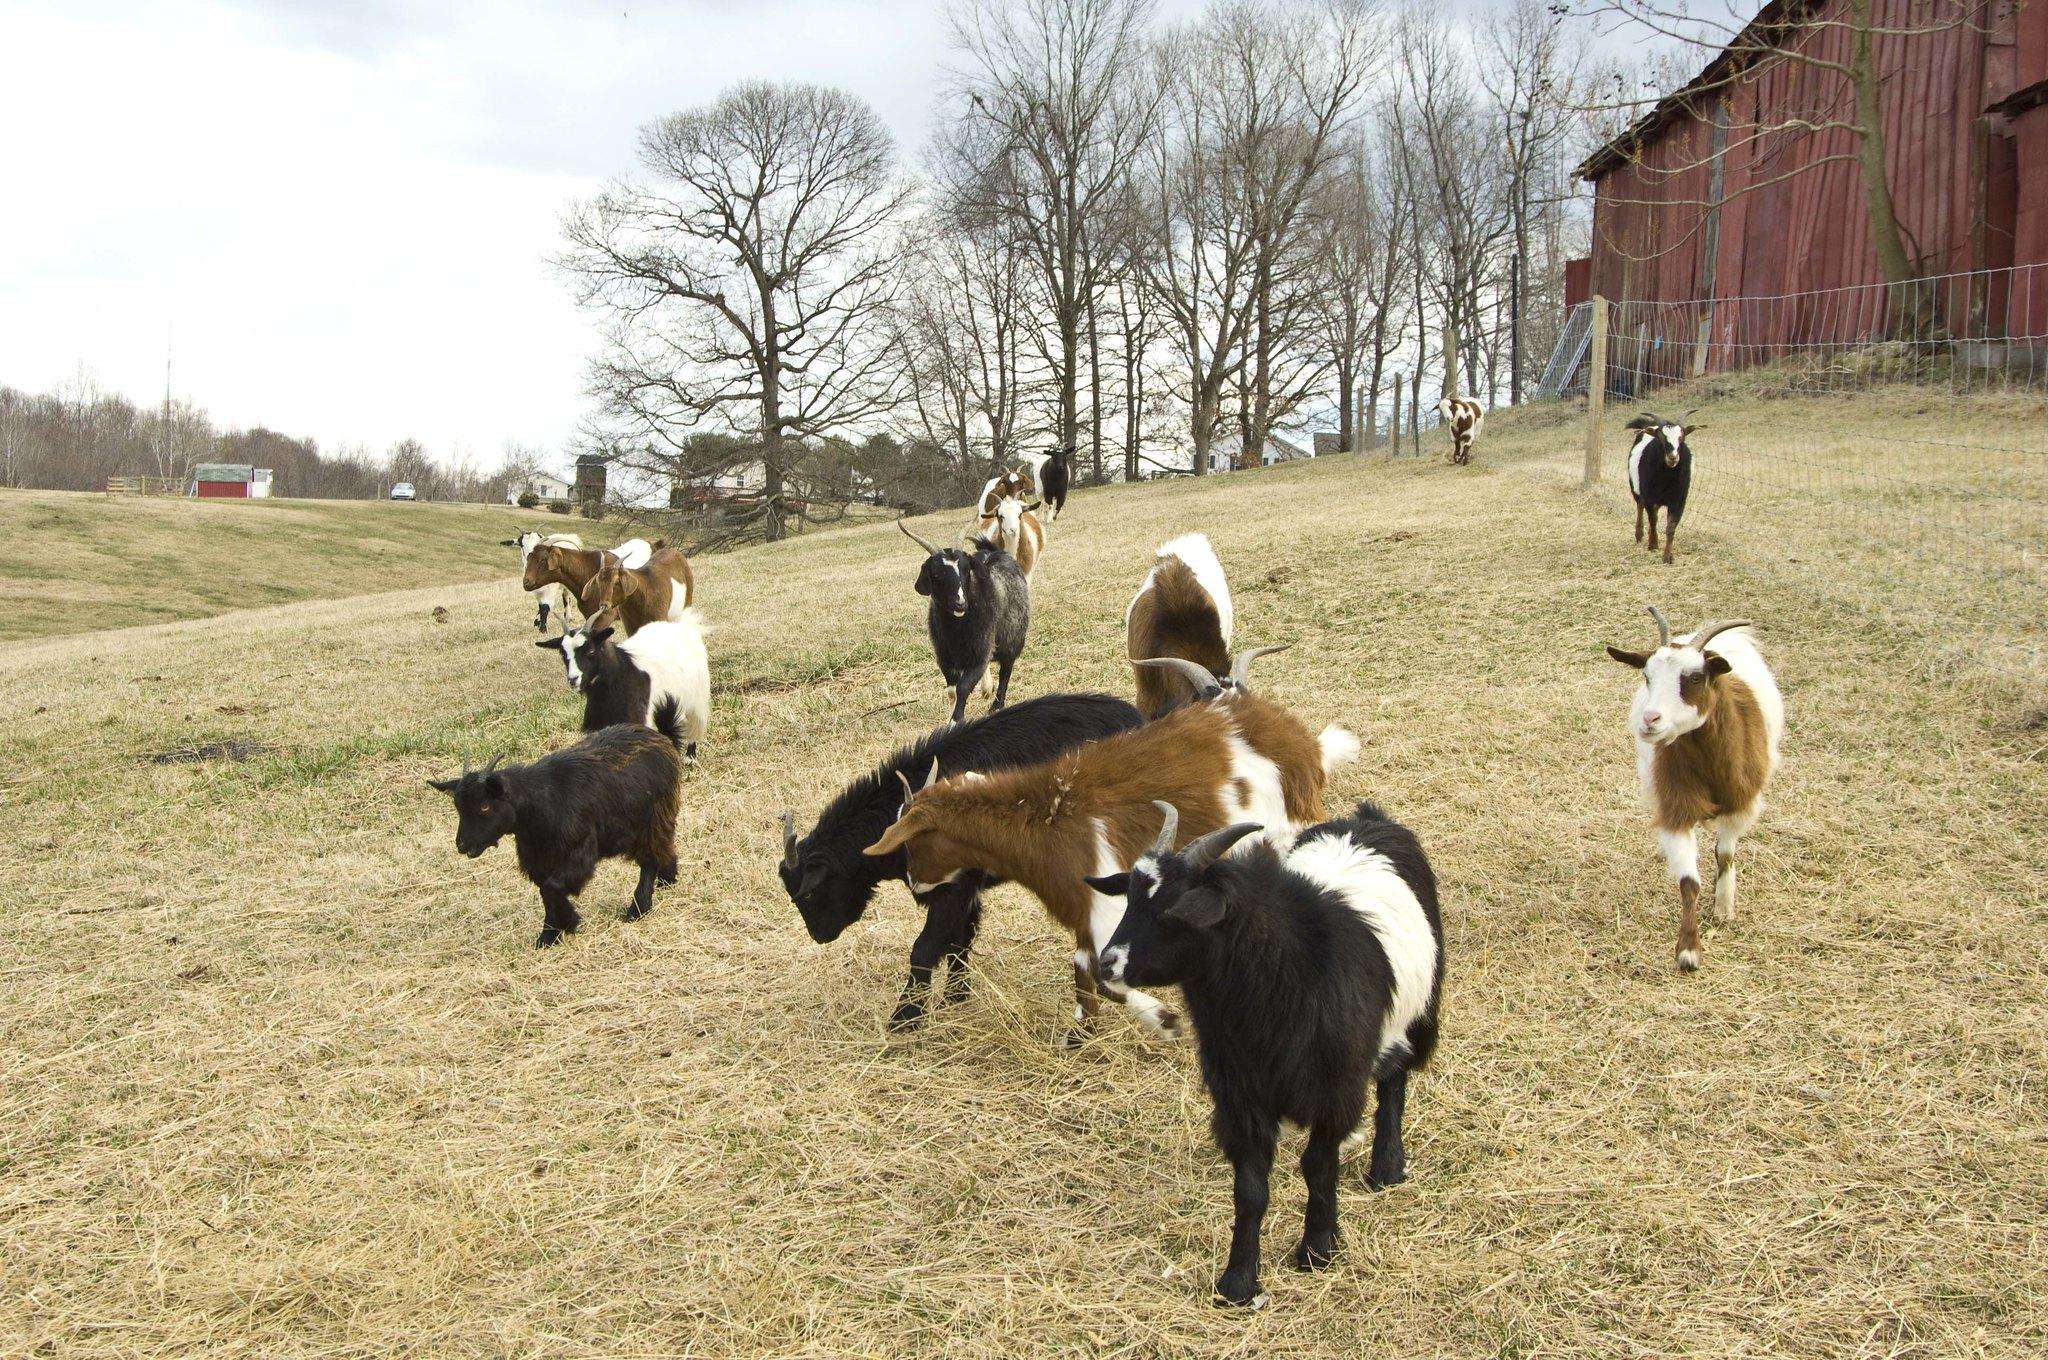 Group of mixed color goats in a pasture with a red barn in the background.